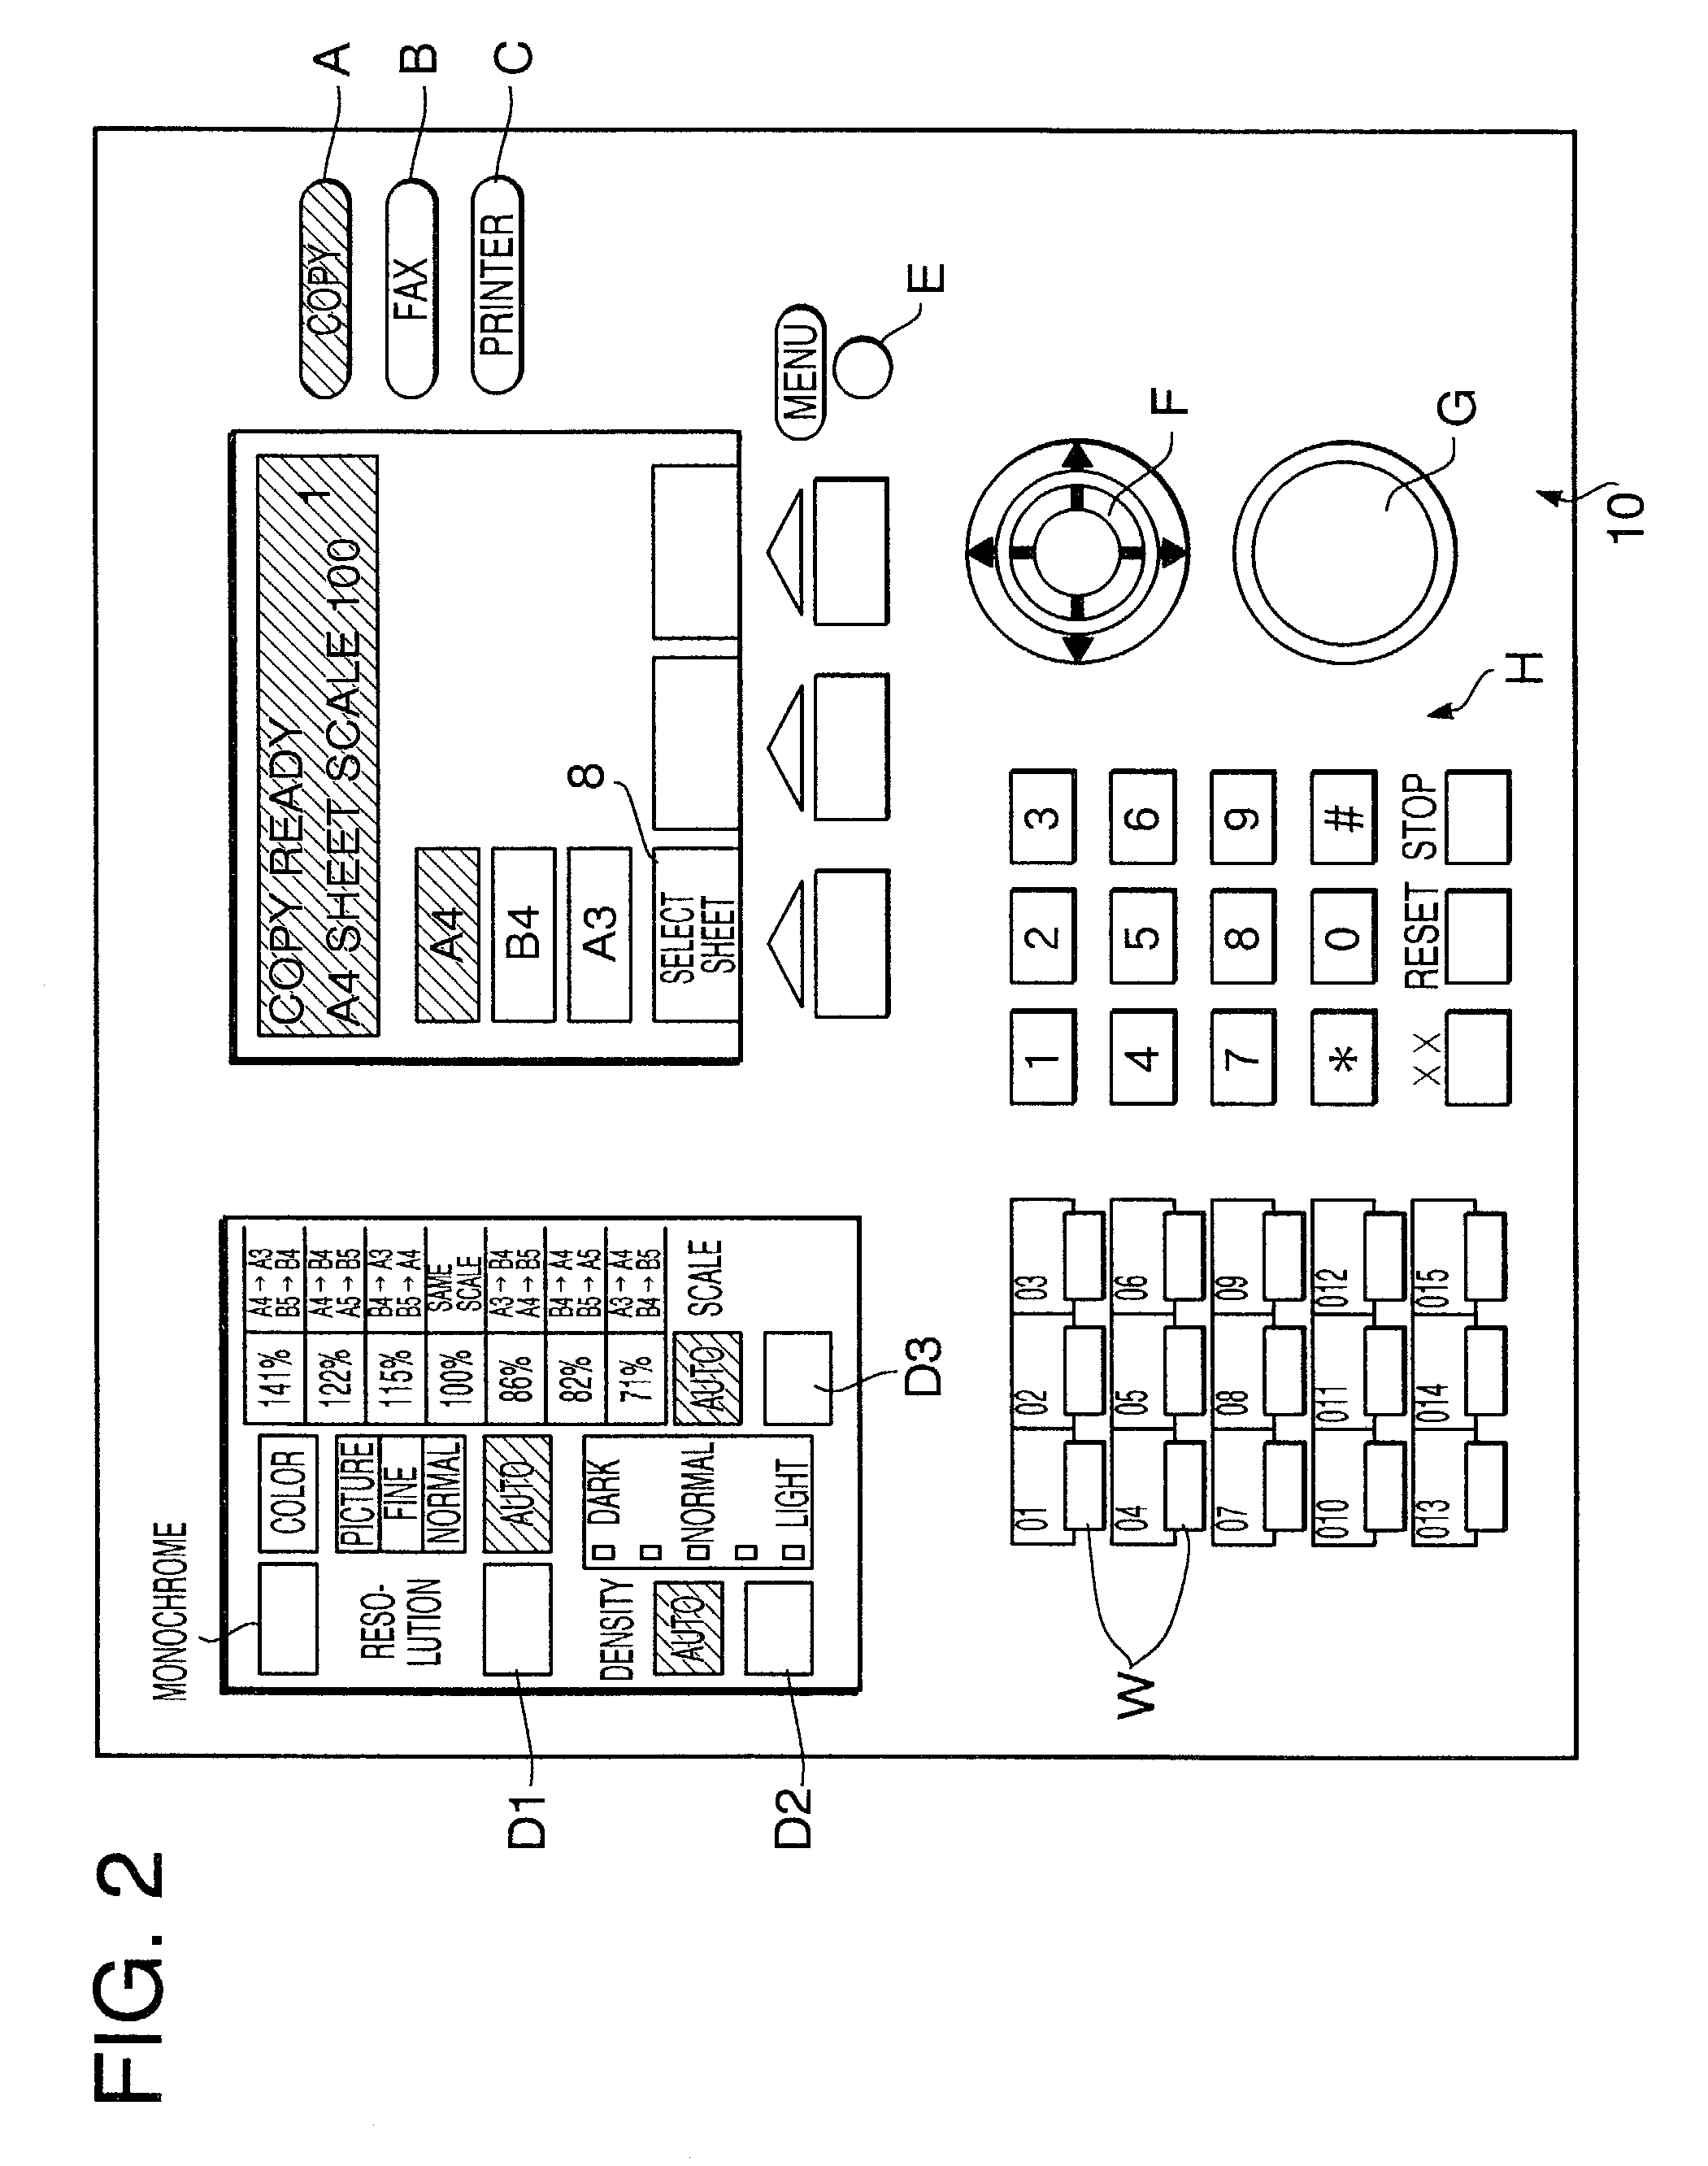 Recording apparatus with print function and copy function, including storing charges for each function